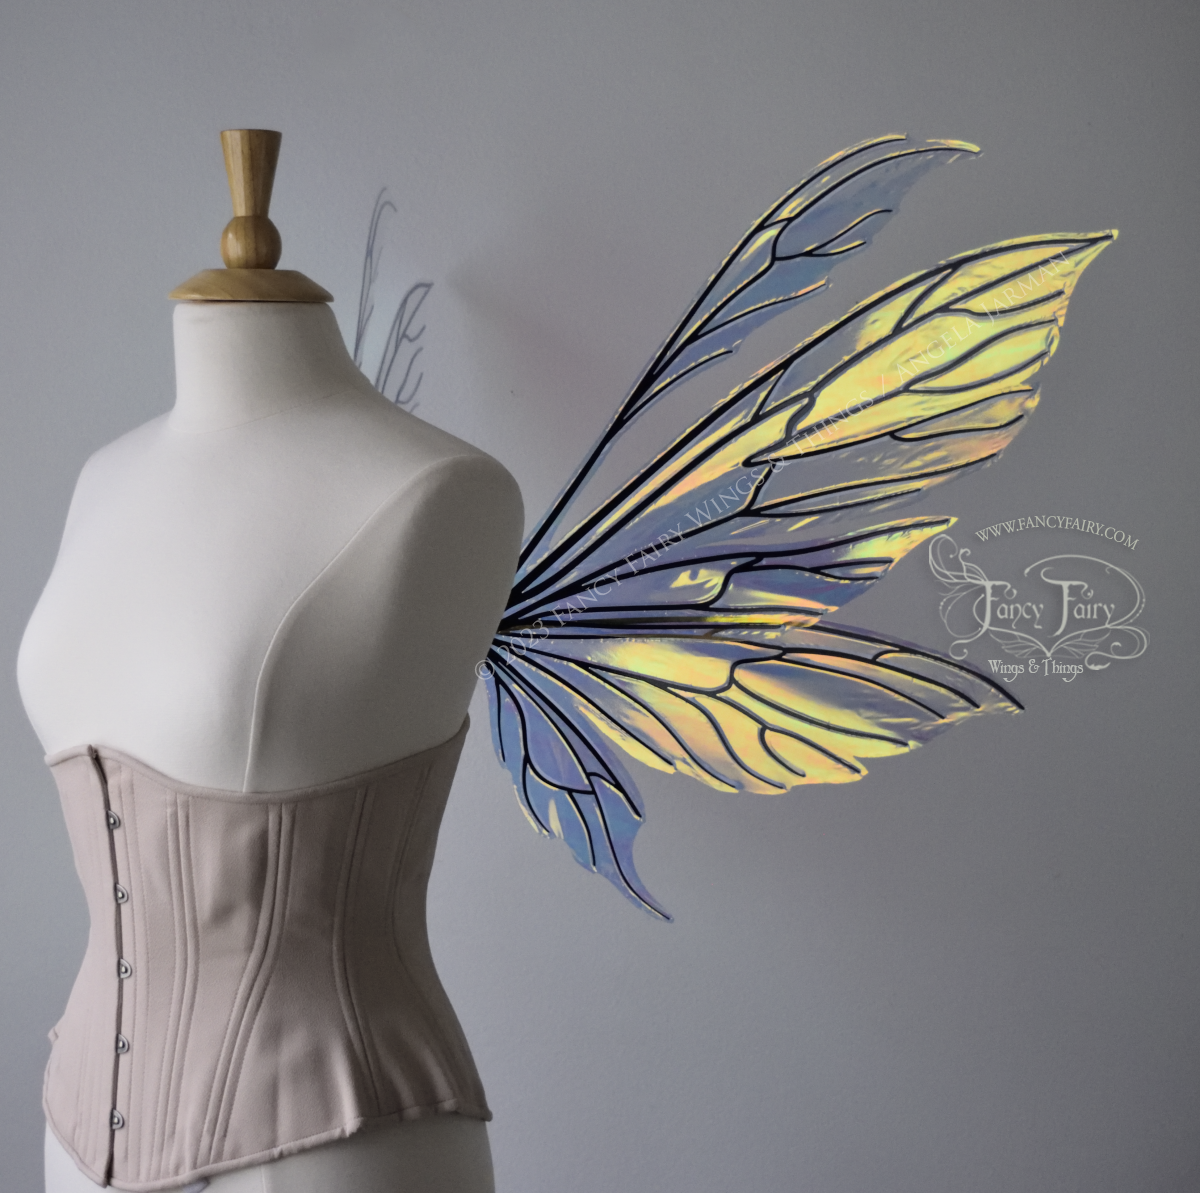 Aynia Convertible Iridescent Fairy Wings in Clear Diamond Fire with Black veins, Ready to Ship